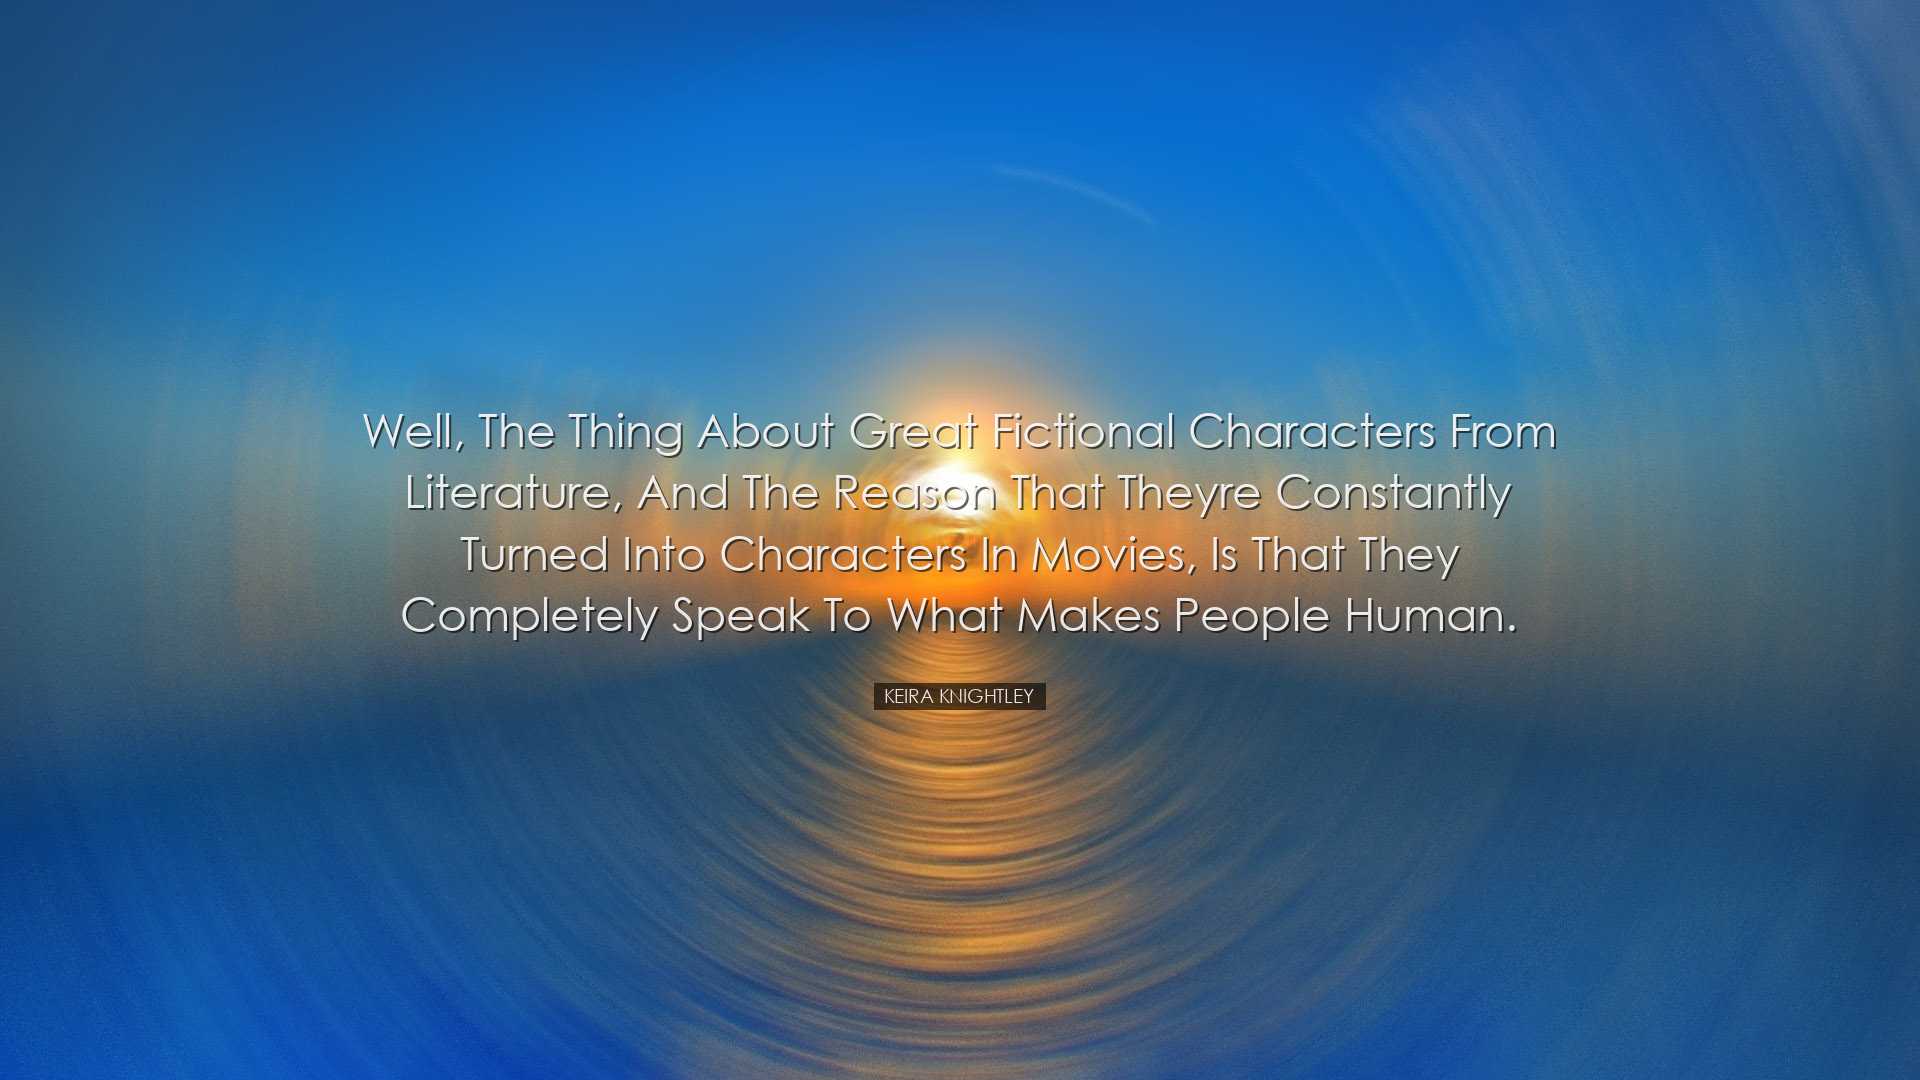 Well, the thing about great fictional characters from literature,